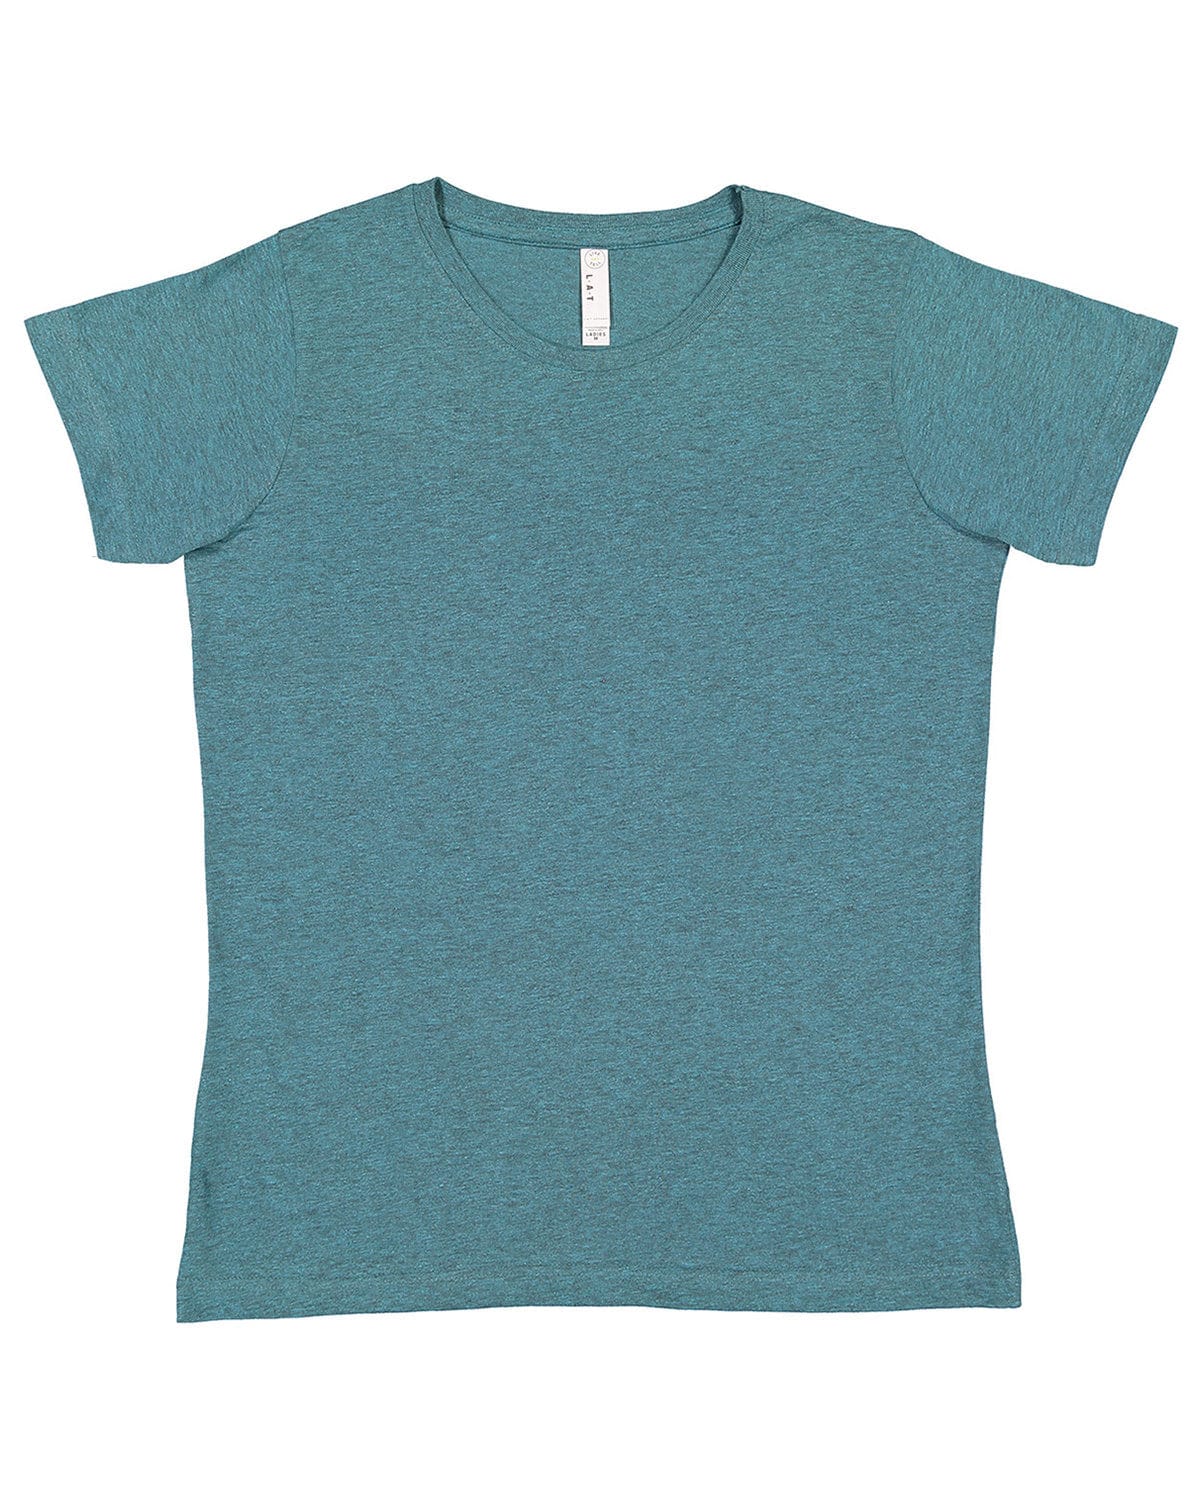 LAT 3516: Ladies' Fine Jersey T-Shirt, Extended Colors 2